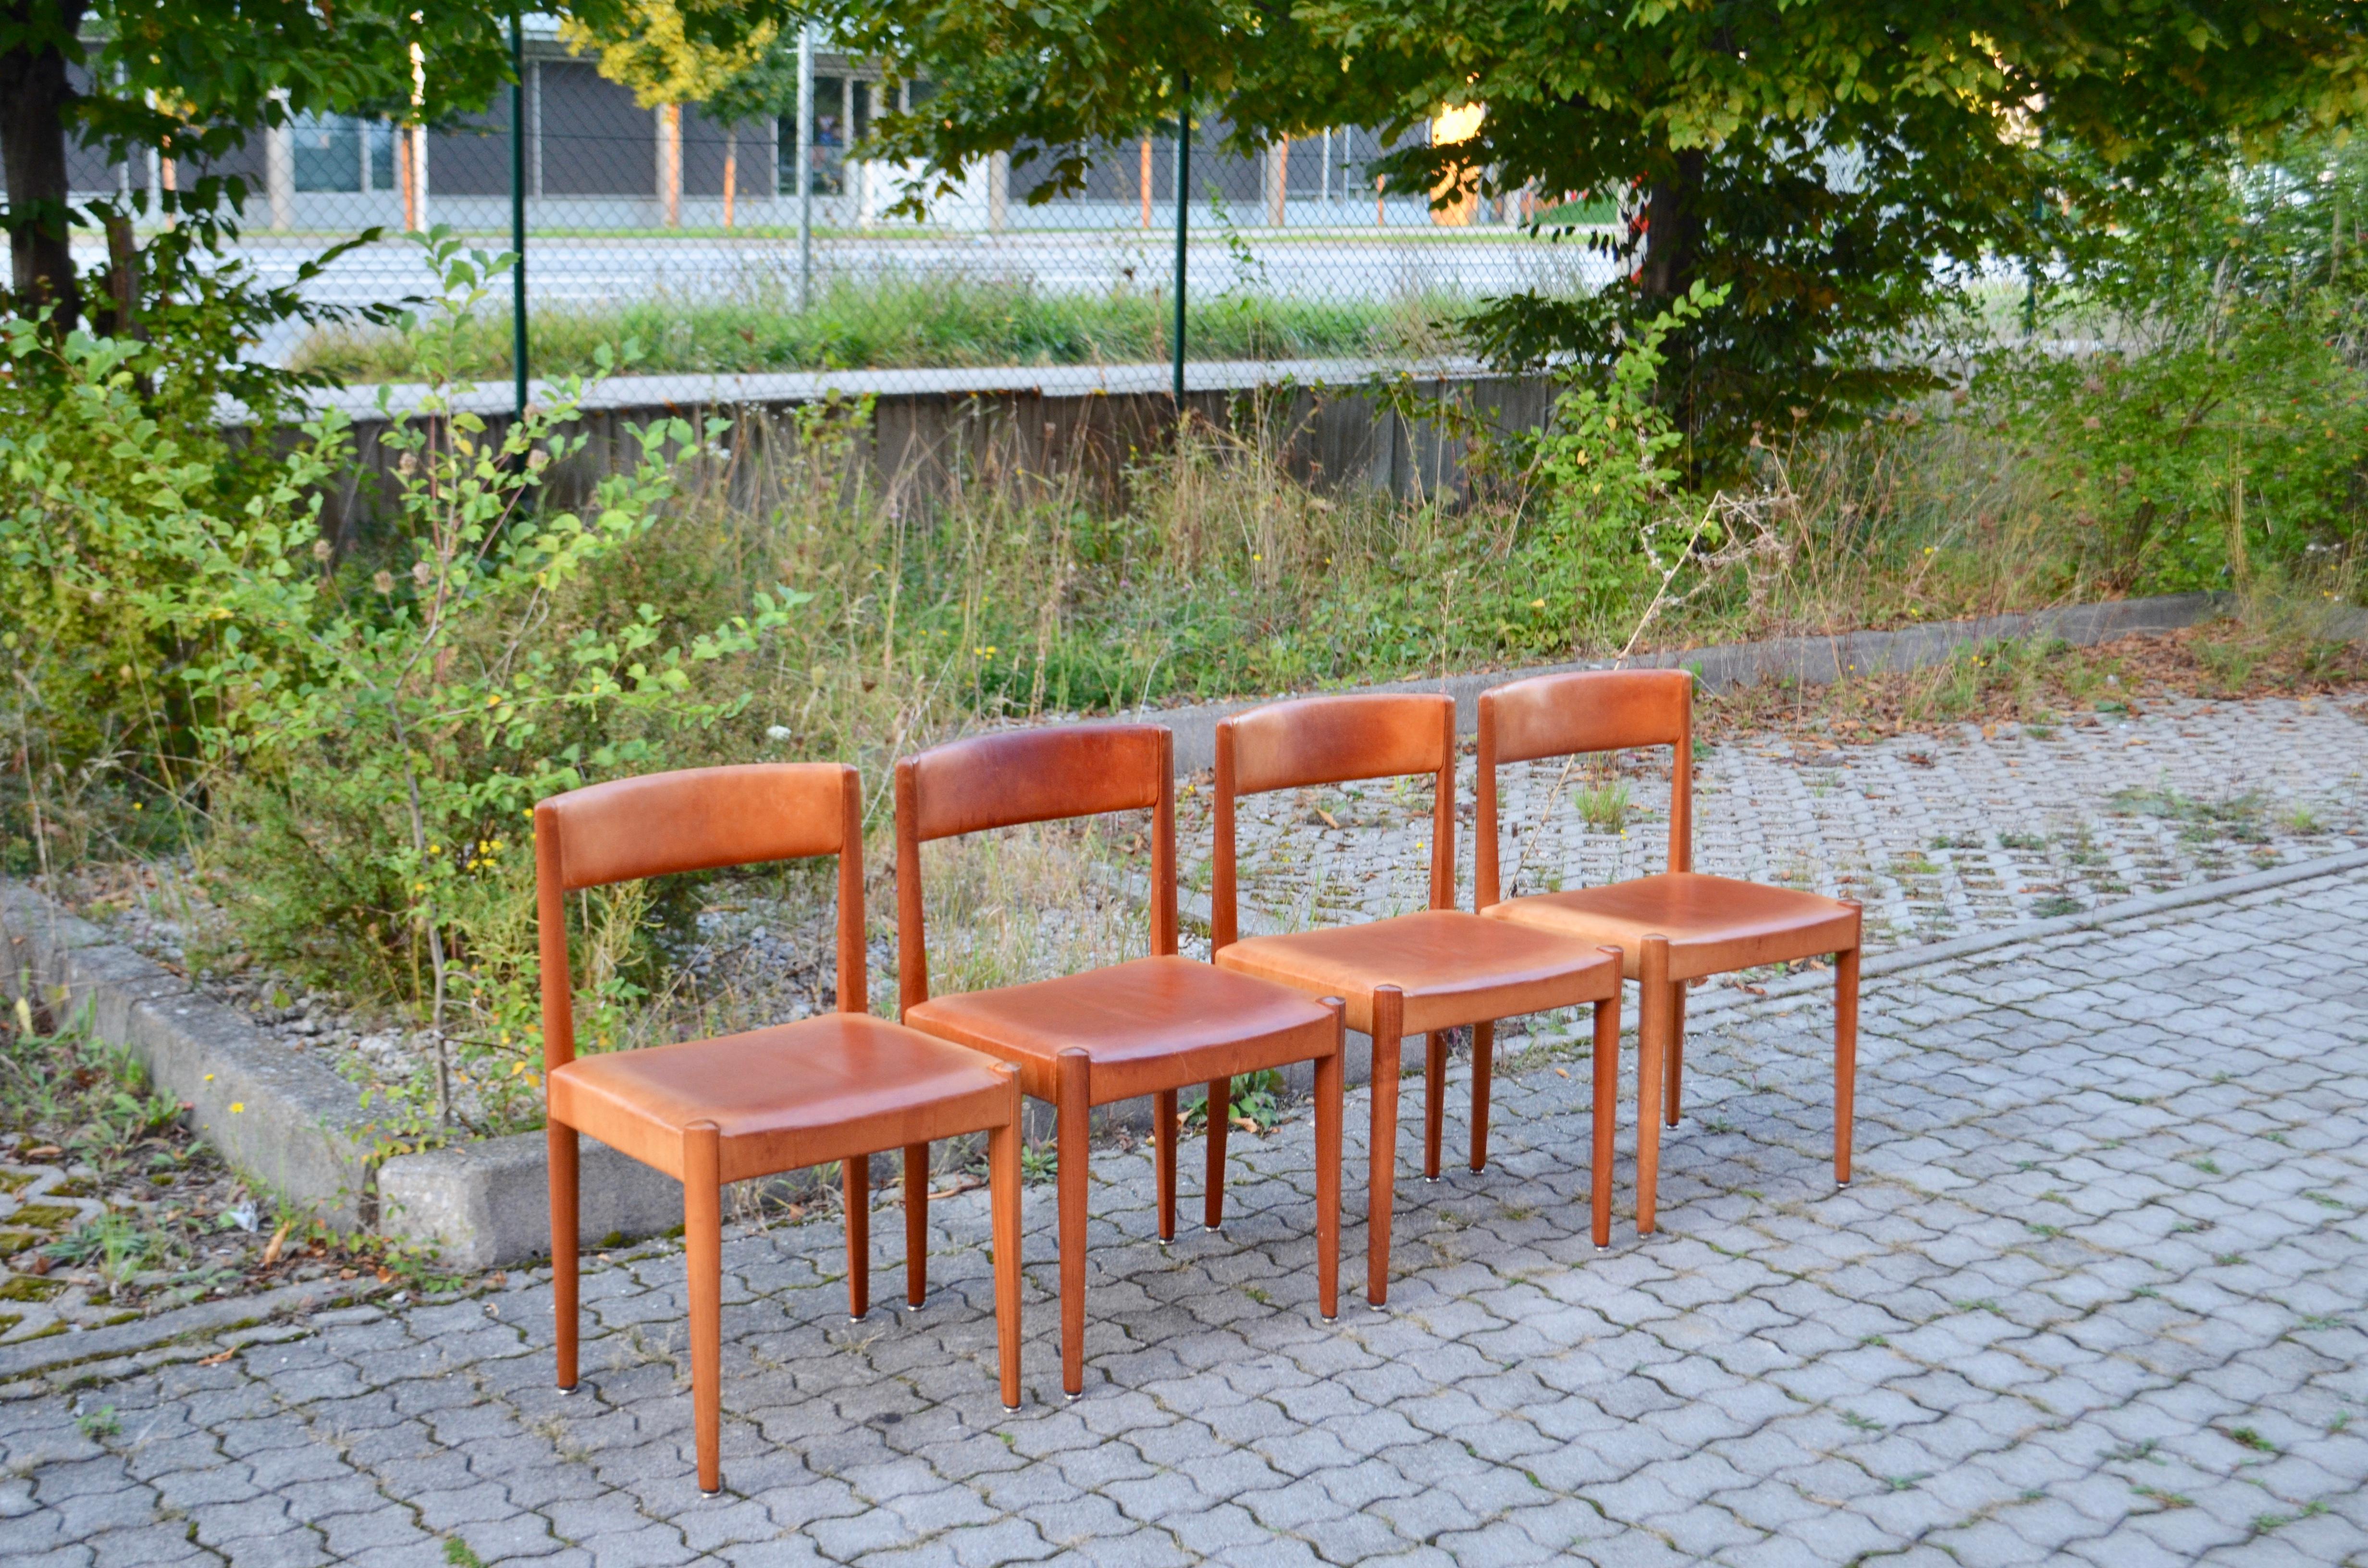 Aage Schmidt Christensen dining chairs for Fritz Hansen.
Modell version 4112.
Solid teak wood and original vegetal cognac leather.
These are very old and rare versions with the label underneath the seat.
Produced in the 60ties.
The frame and